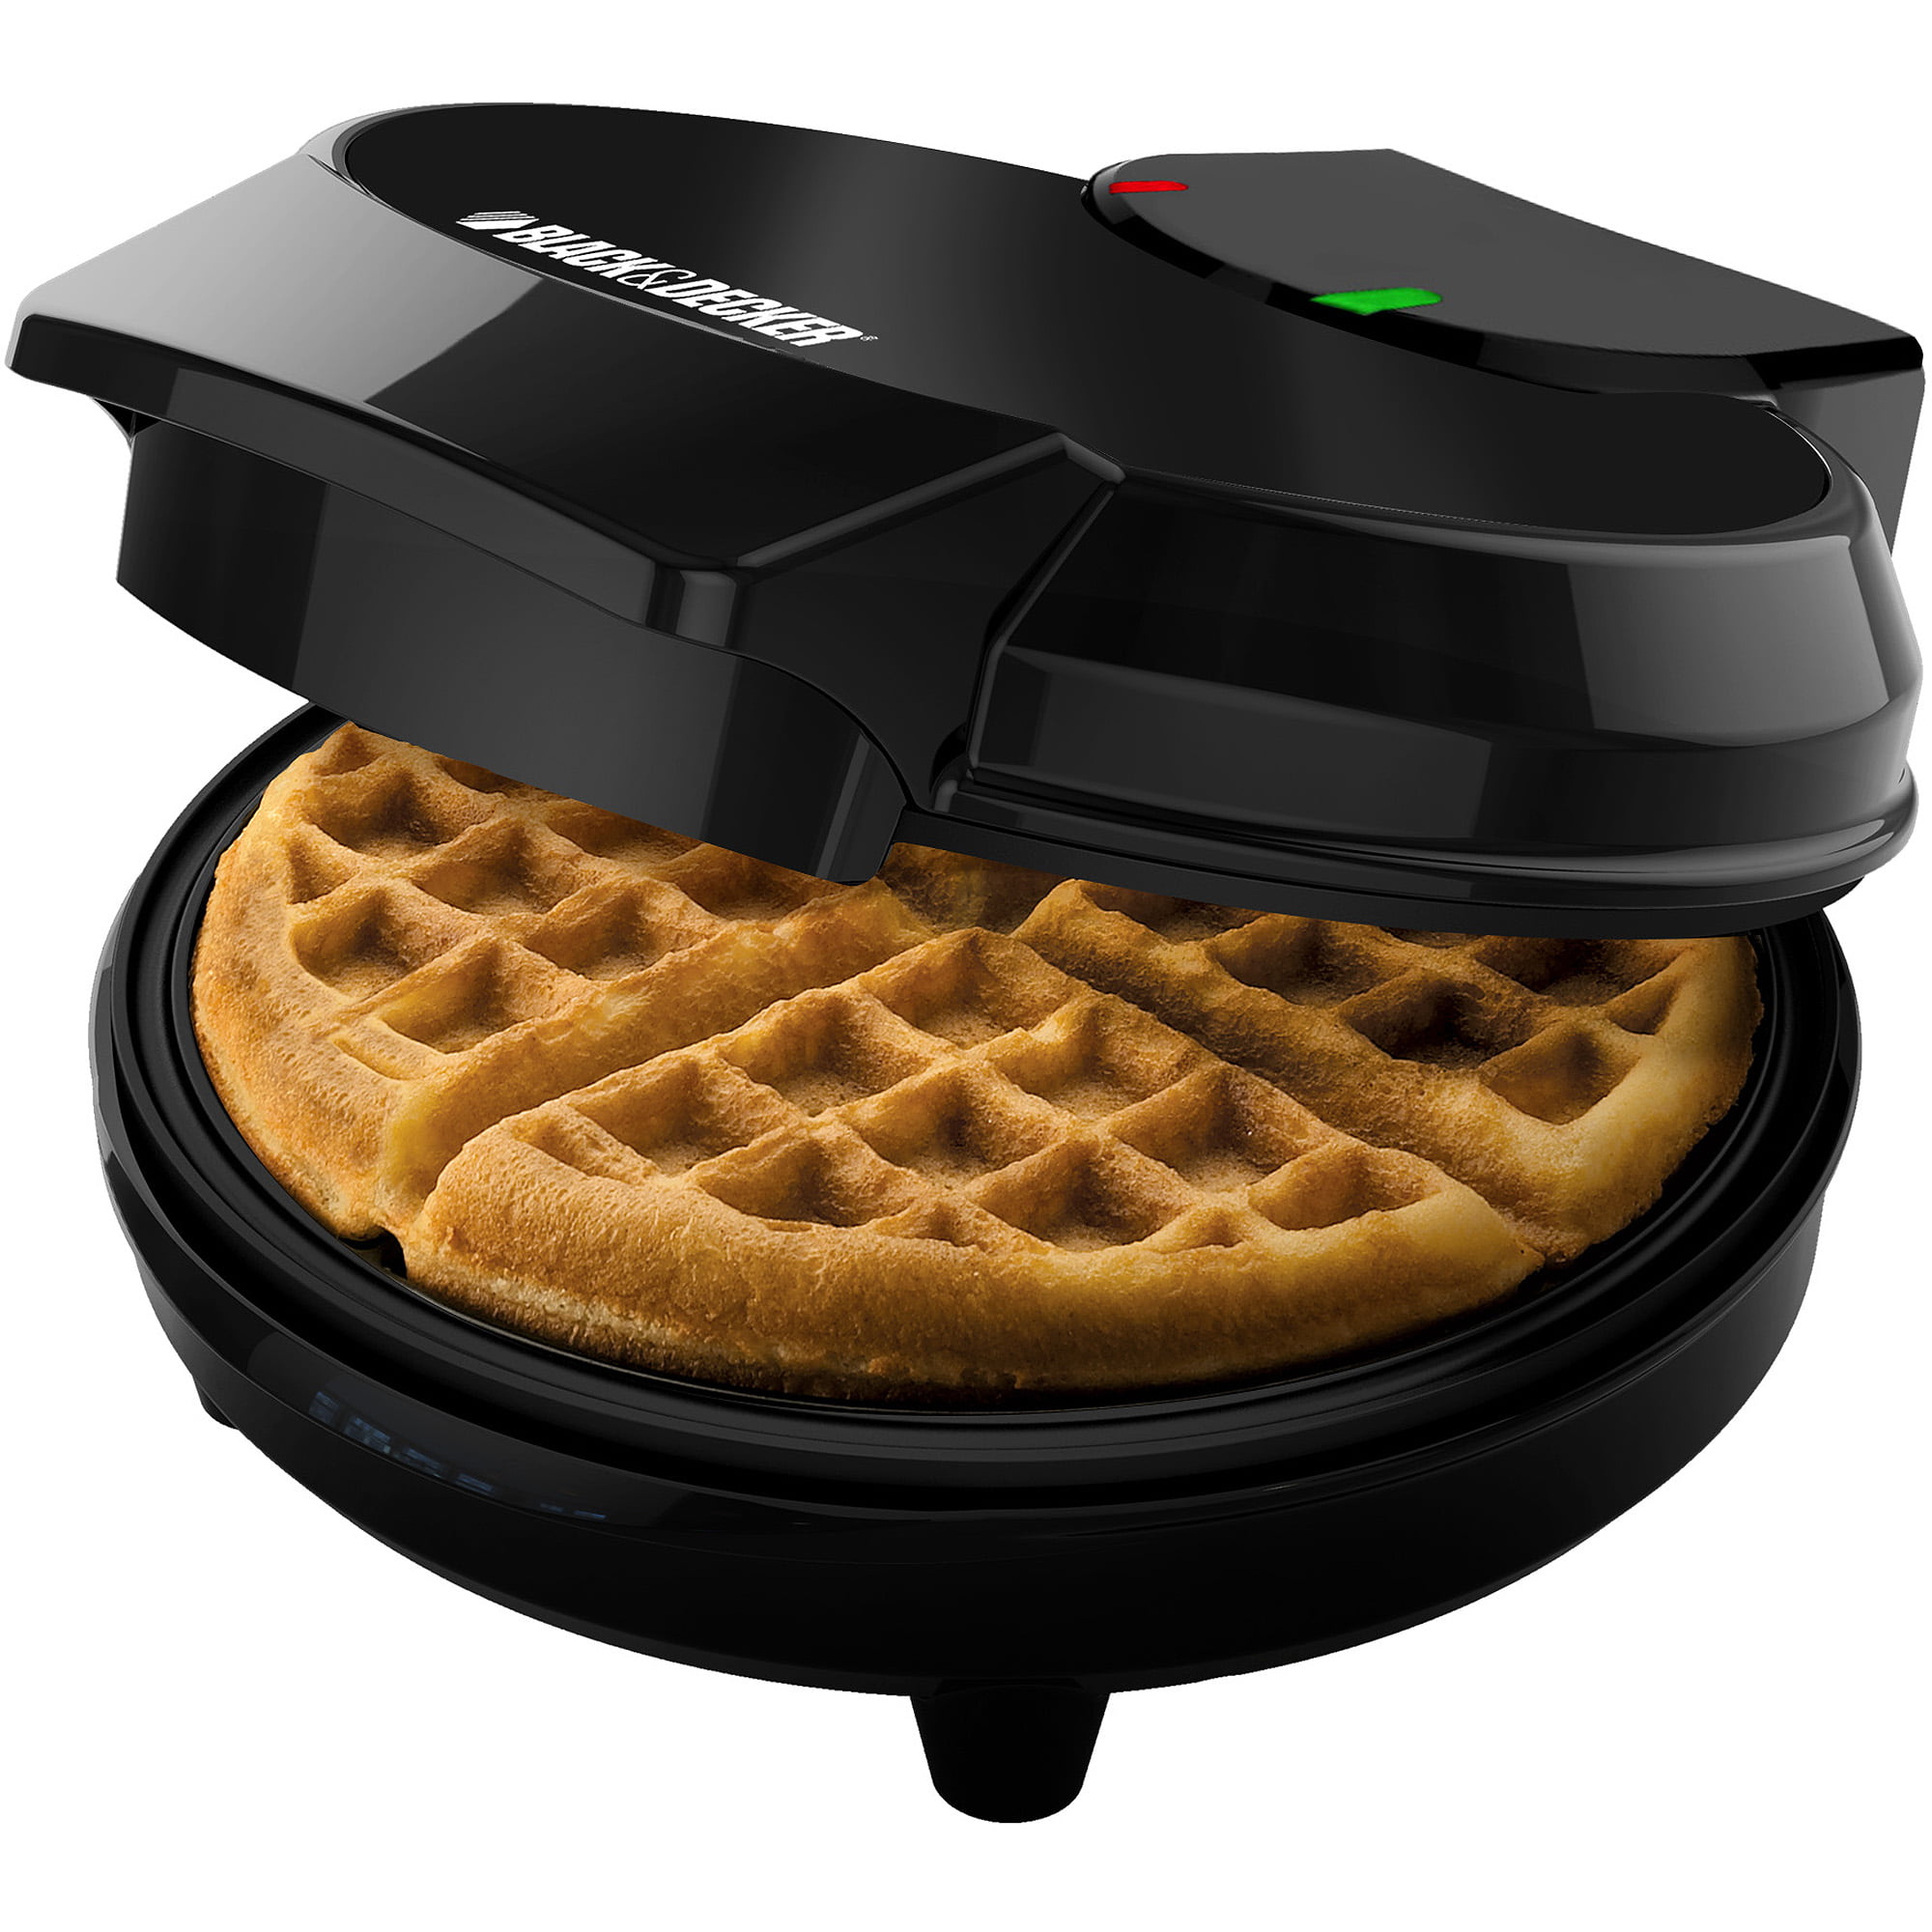 How Long To Use A Black Decker Belgian Waffle Iron